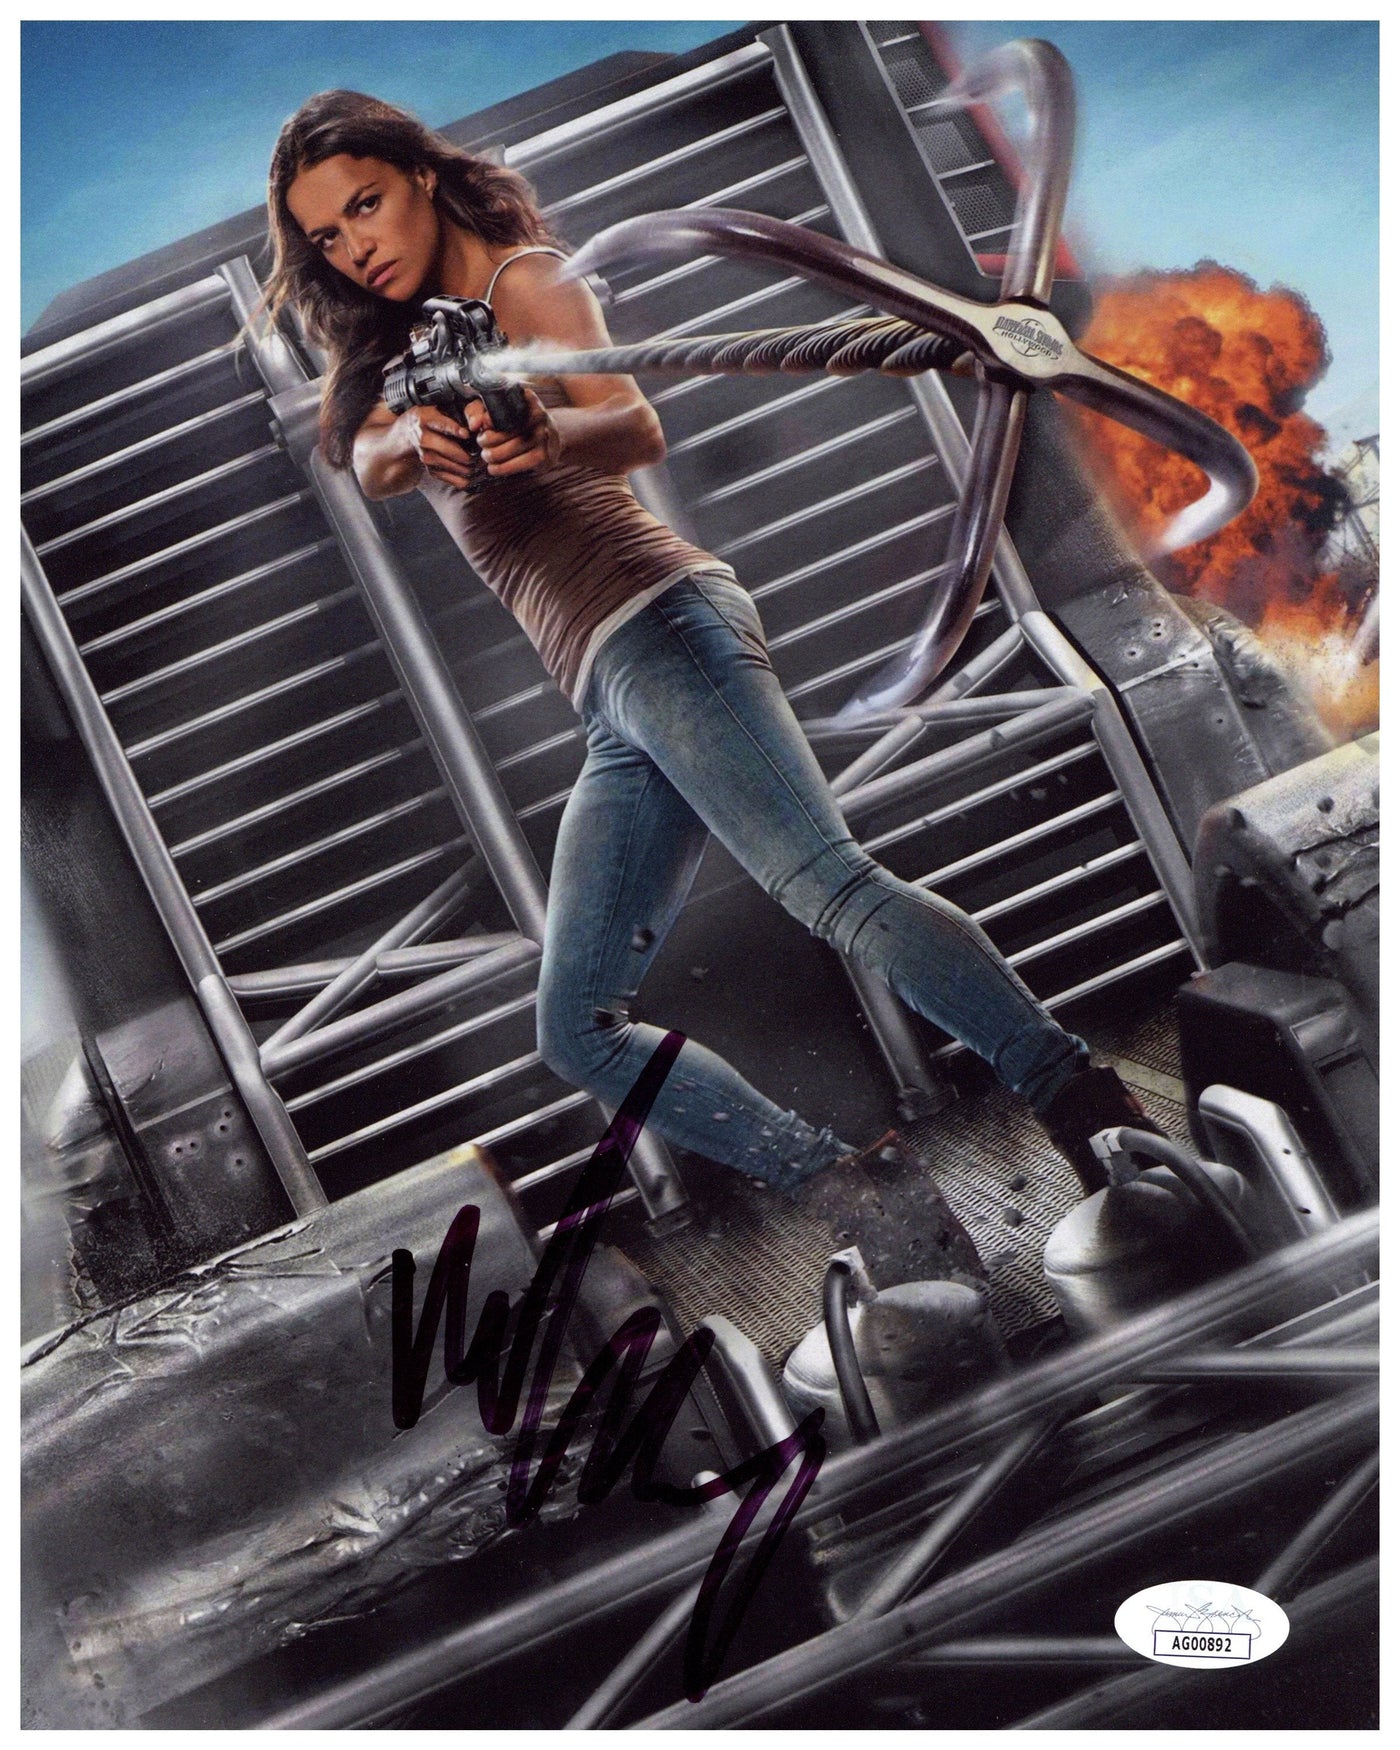 Michelle Rodriguez Signed 8x10 Photo Fast and the Furious Autographed JSA COA